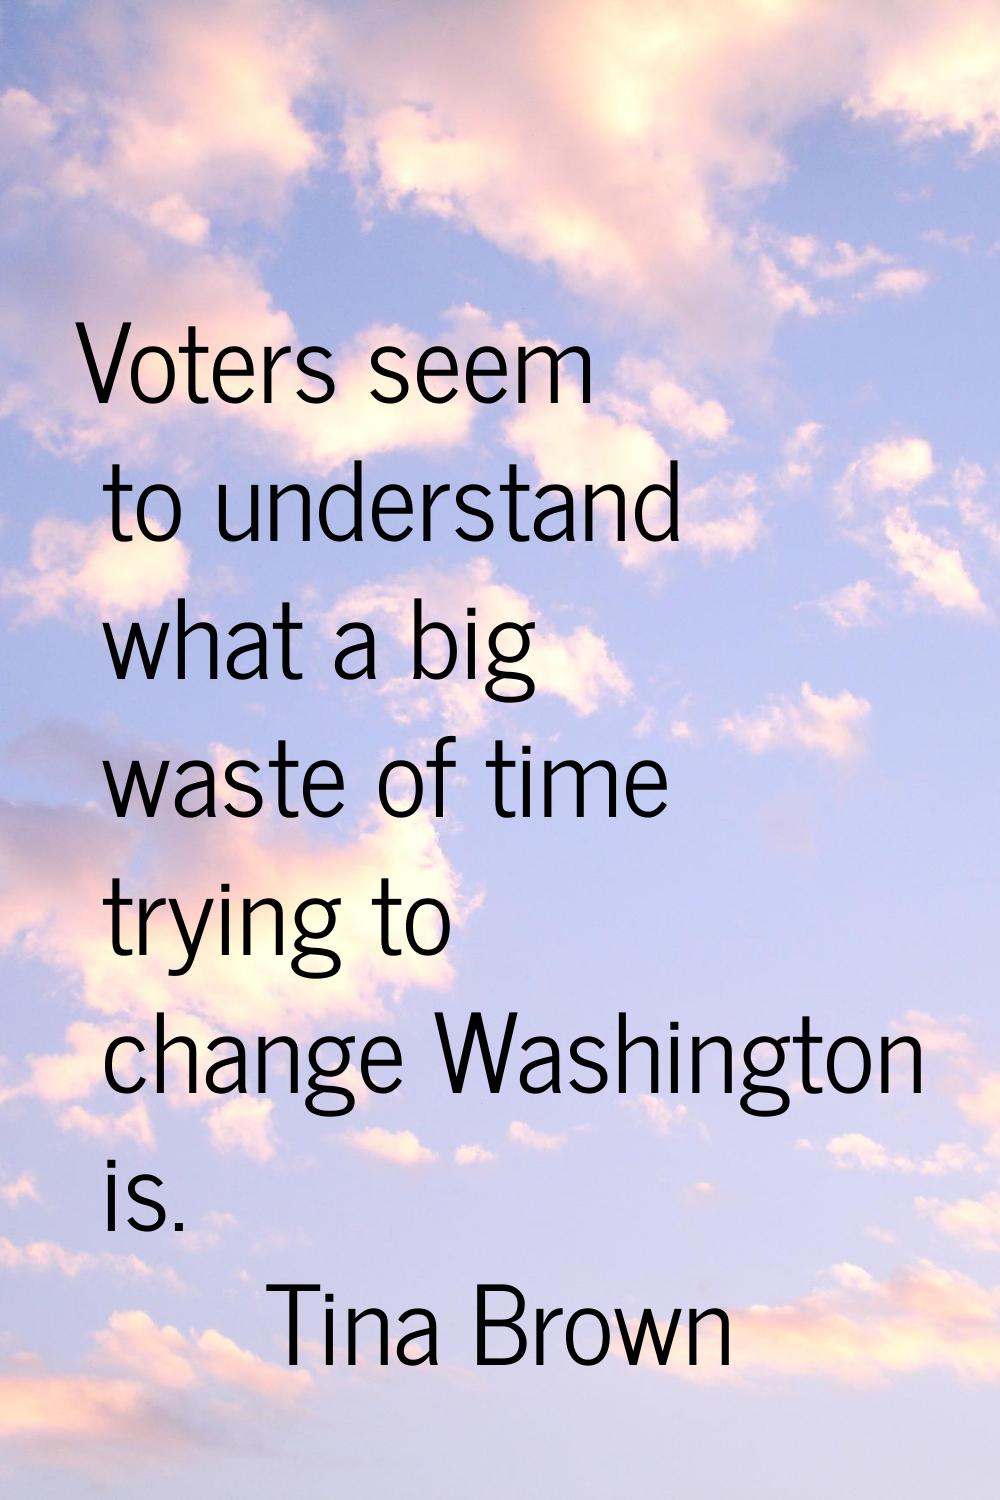 Voters seem to understand what a big waste of time trying to change Washington is.